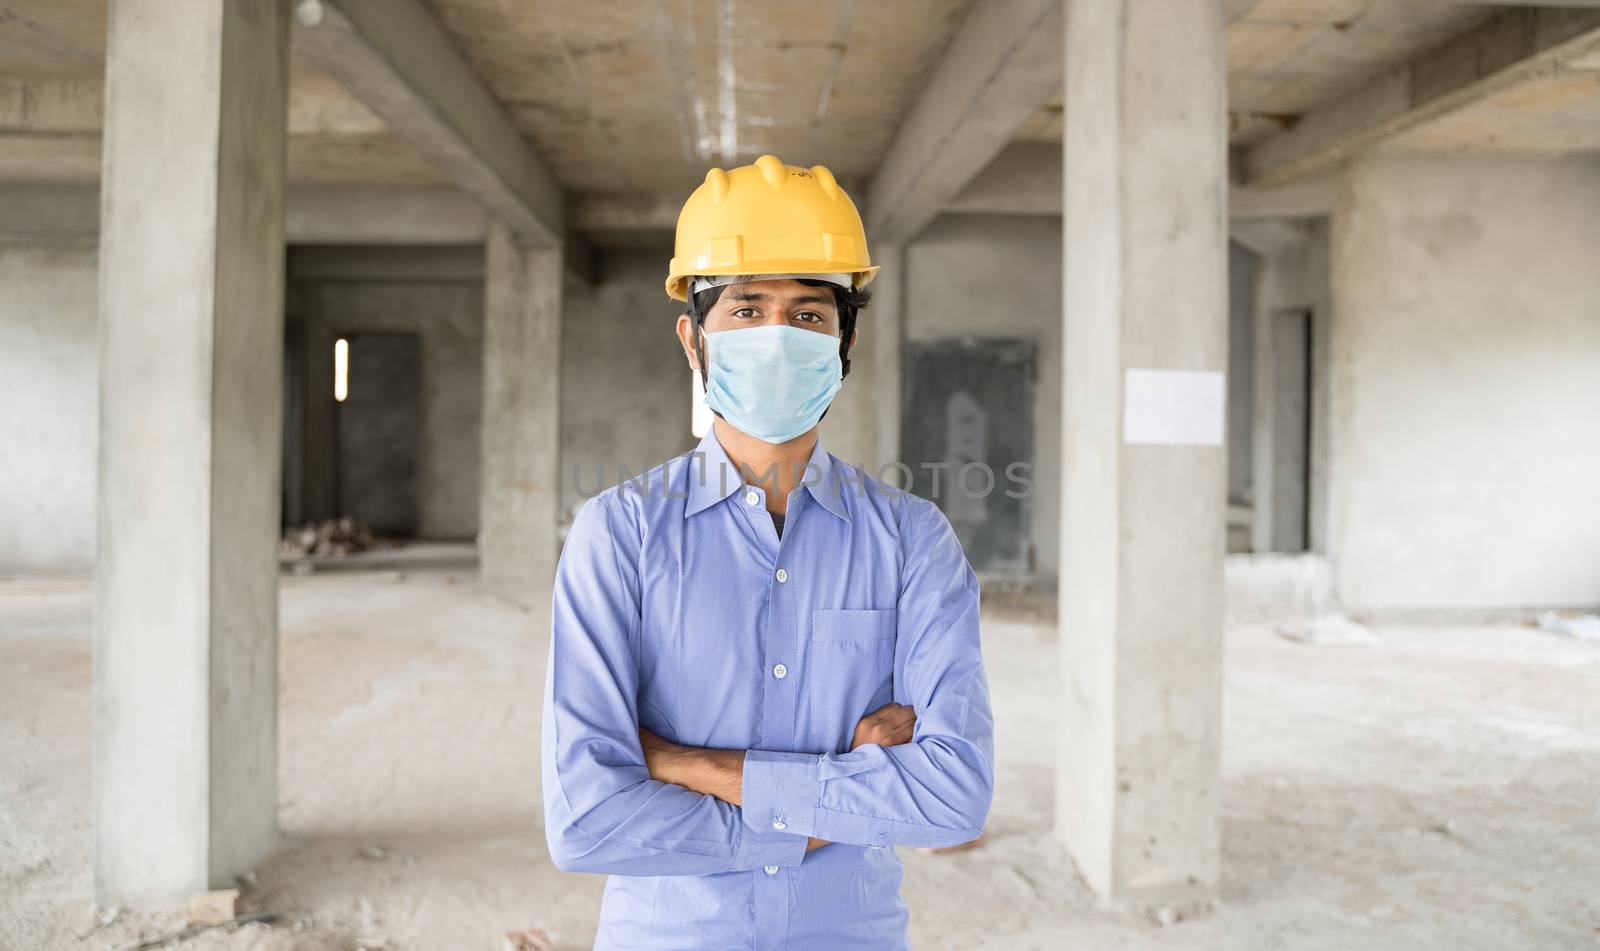 Concept of back to work, opening of construction sites after covid-19 pandemic - portrait of confident construction worker in a construction helmet arms crossed with medical mask at site. by lakshmiprasad.maski@gmai.com